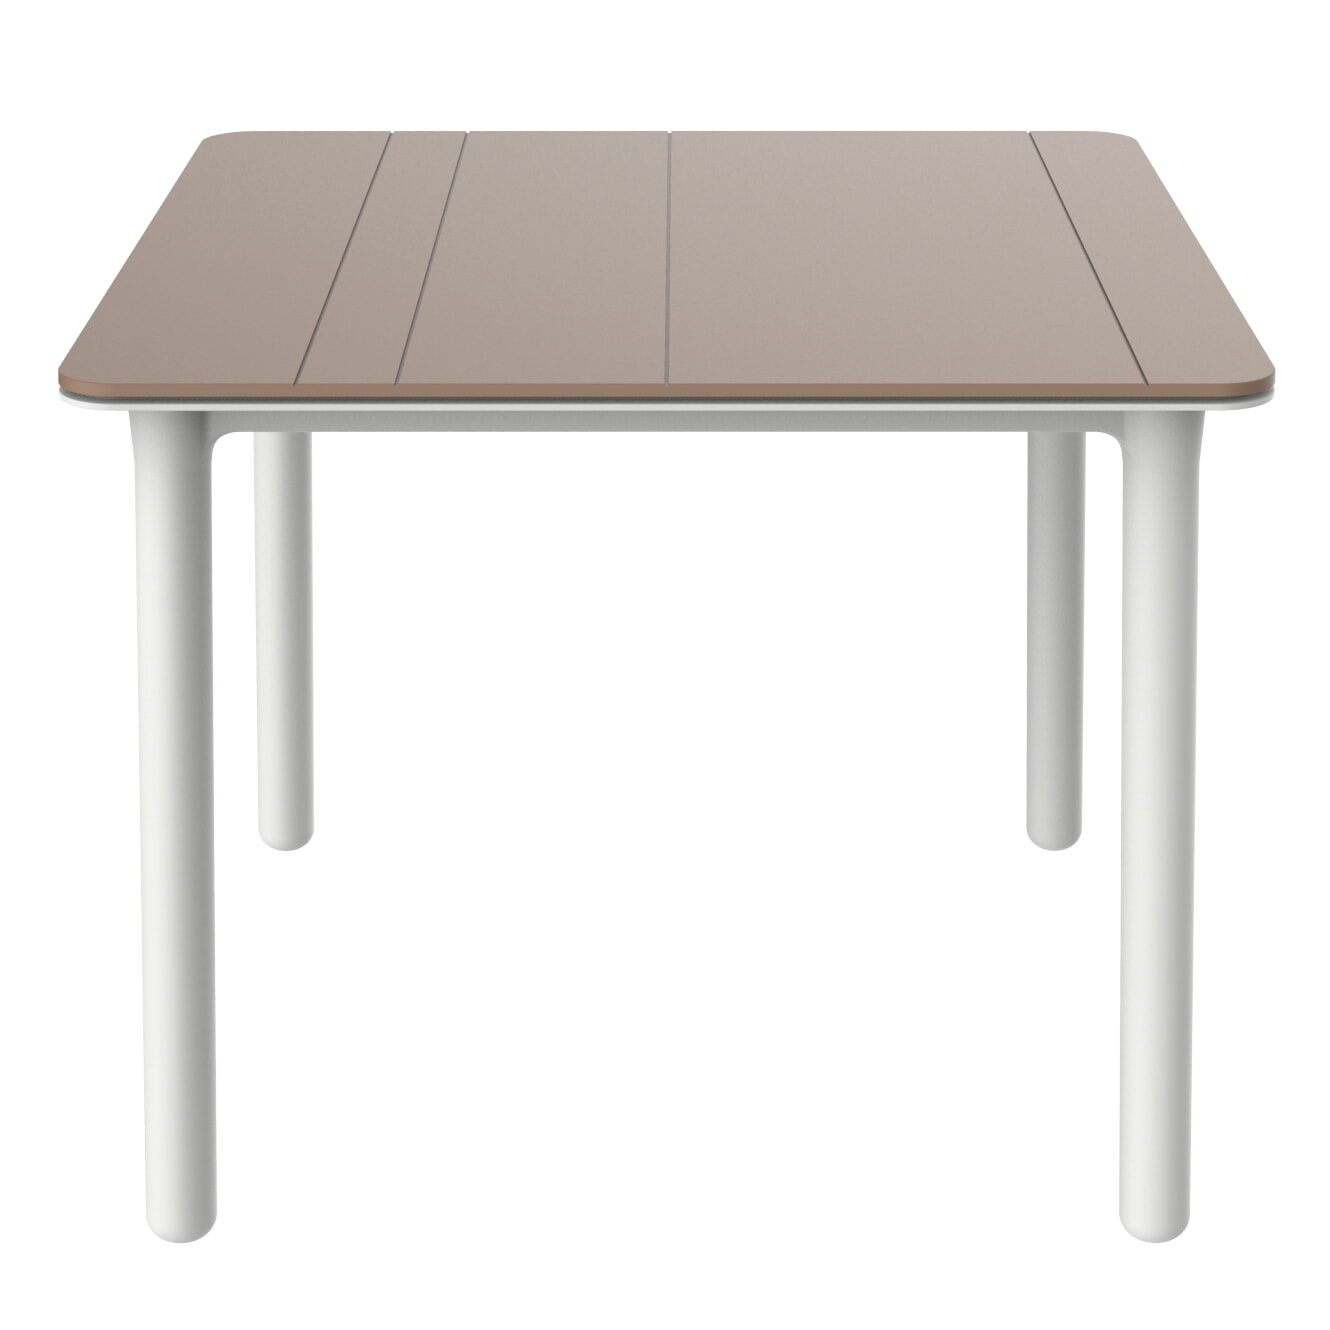 Resol noa square table indoors, outdoors 90x90 white base -